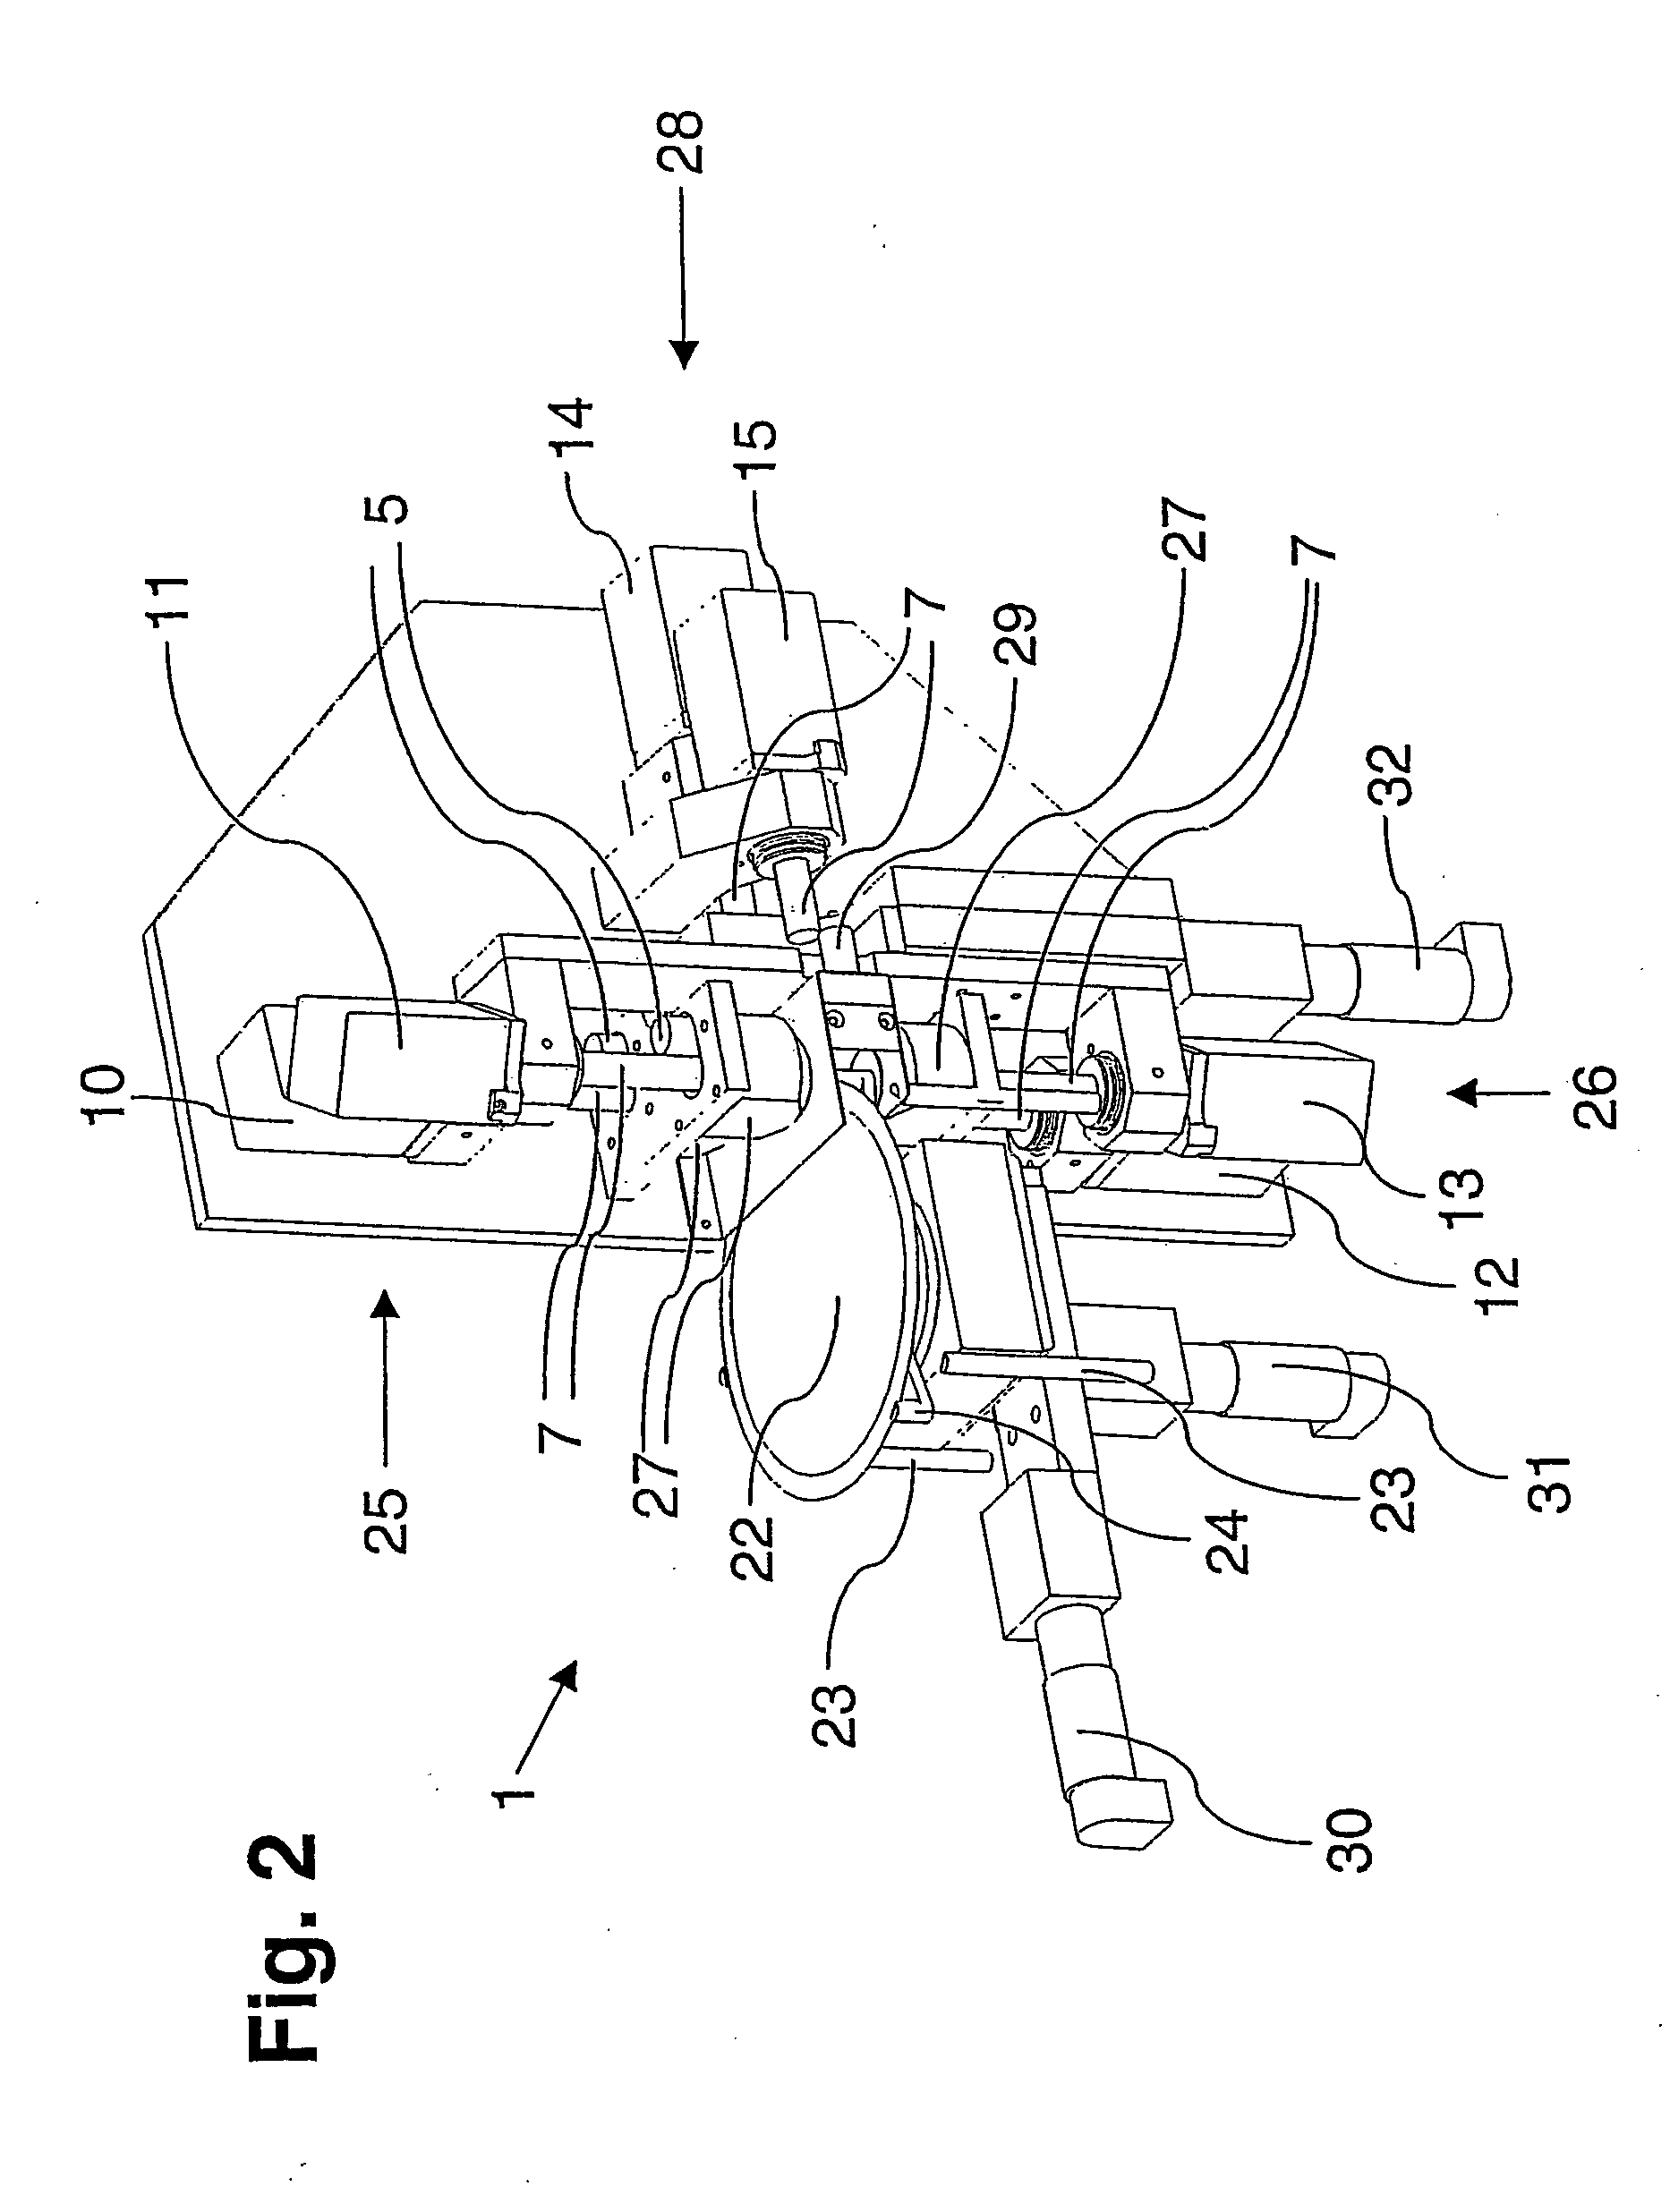 Method and apparatus for optically controlling the quality of objects having a circular edge